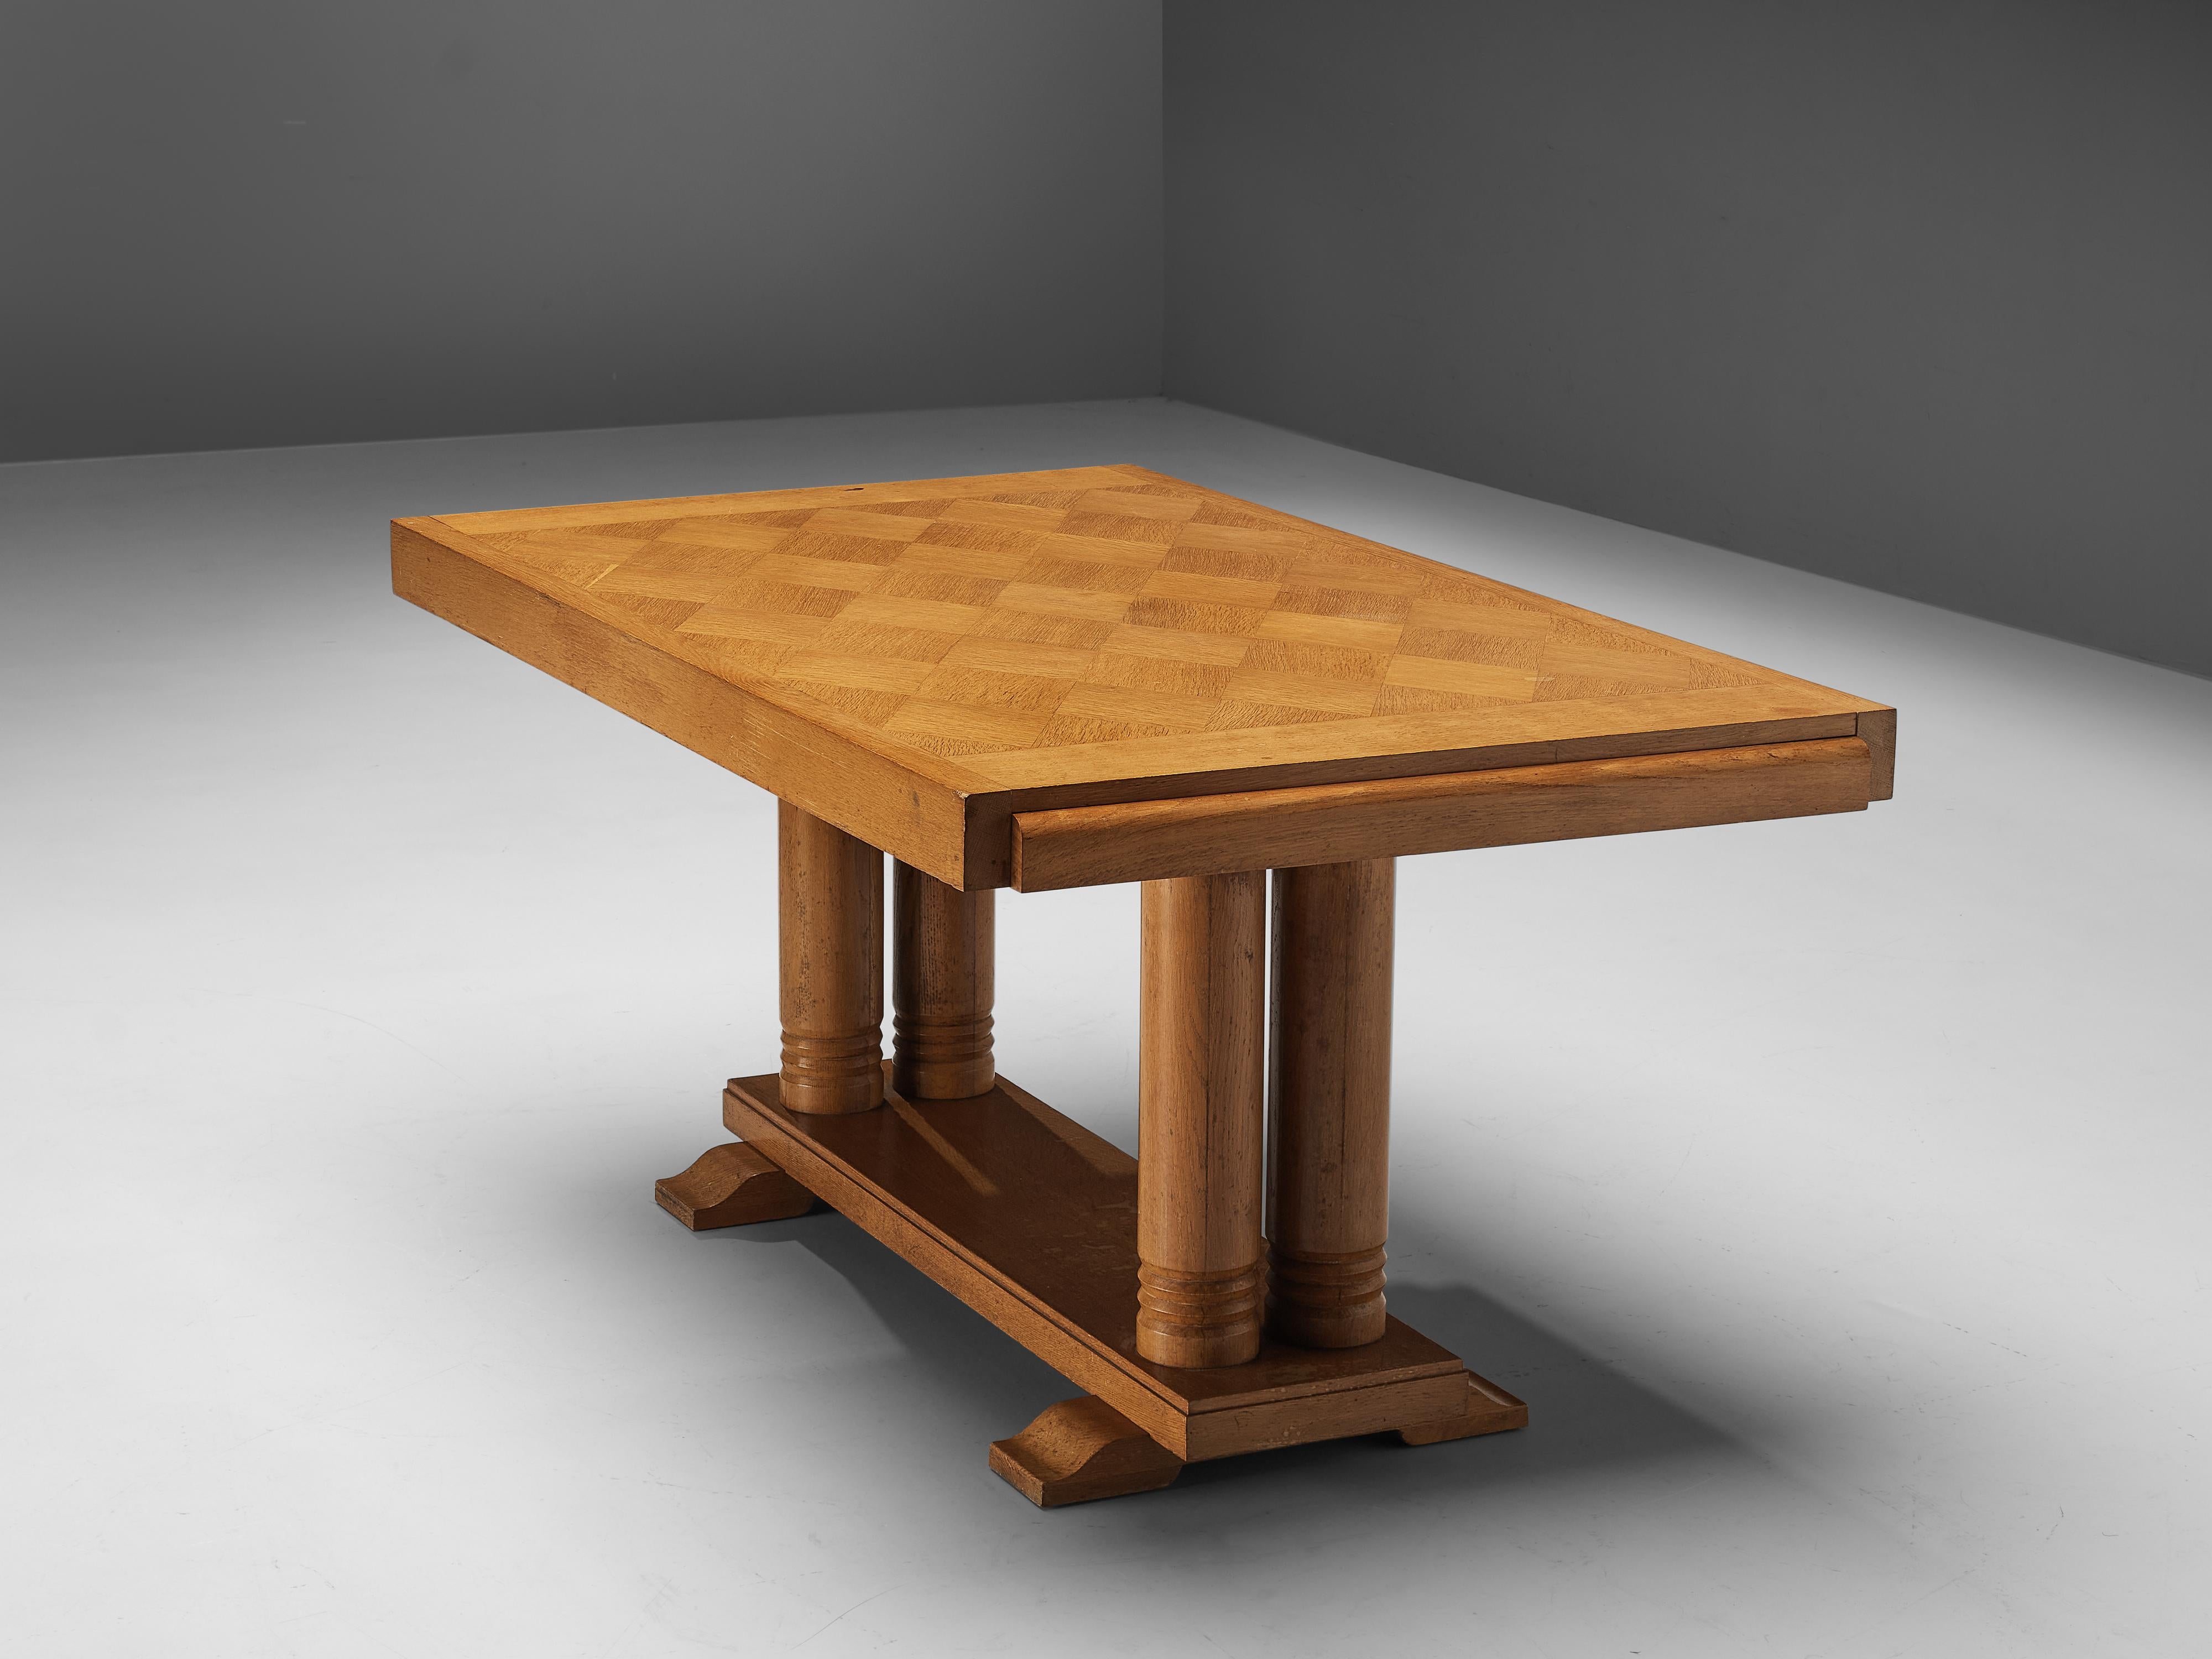 European Dining Table with Inlayed Tabletop in Solid Oak